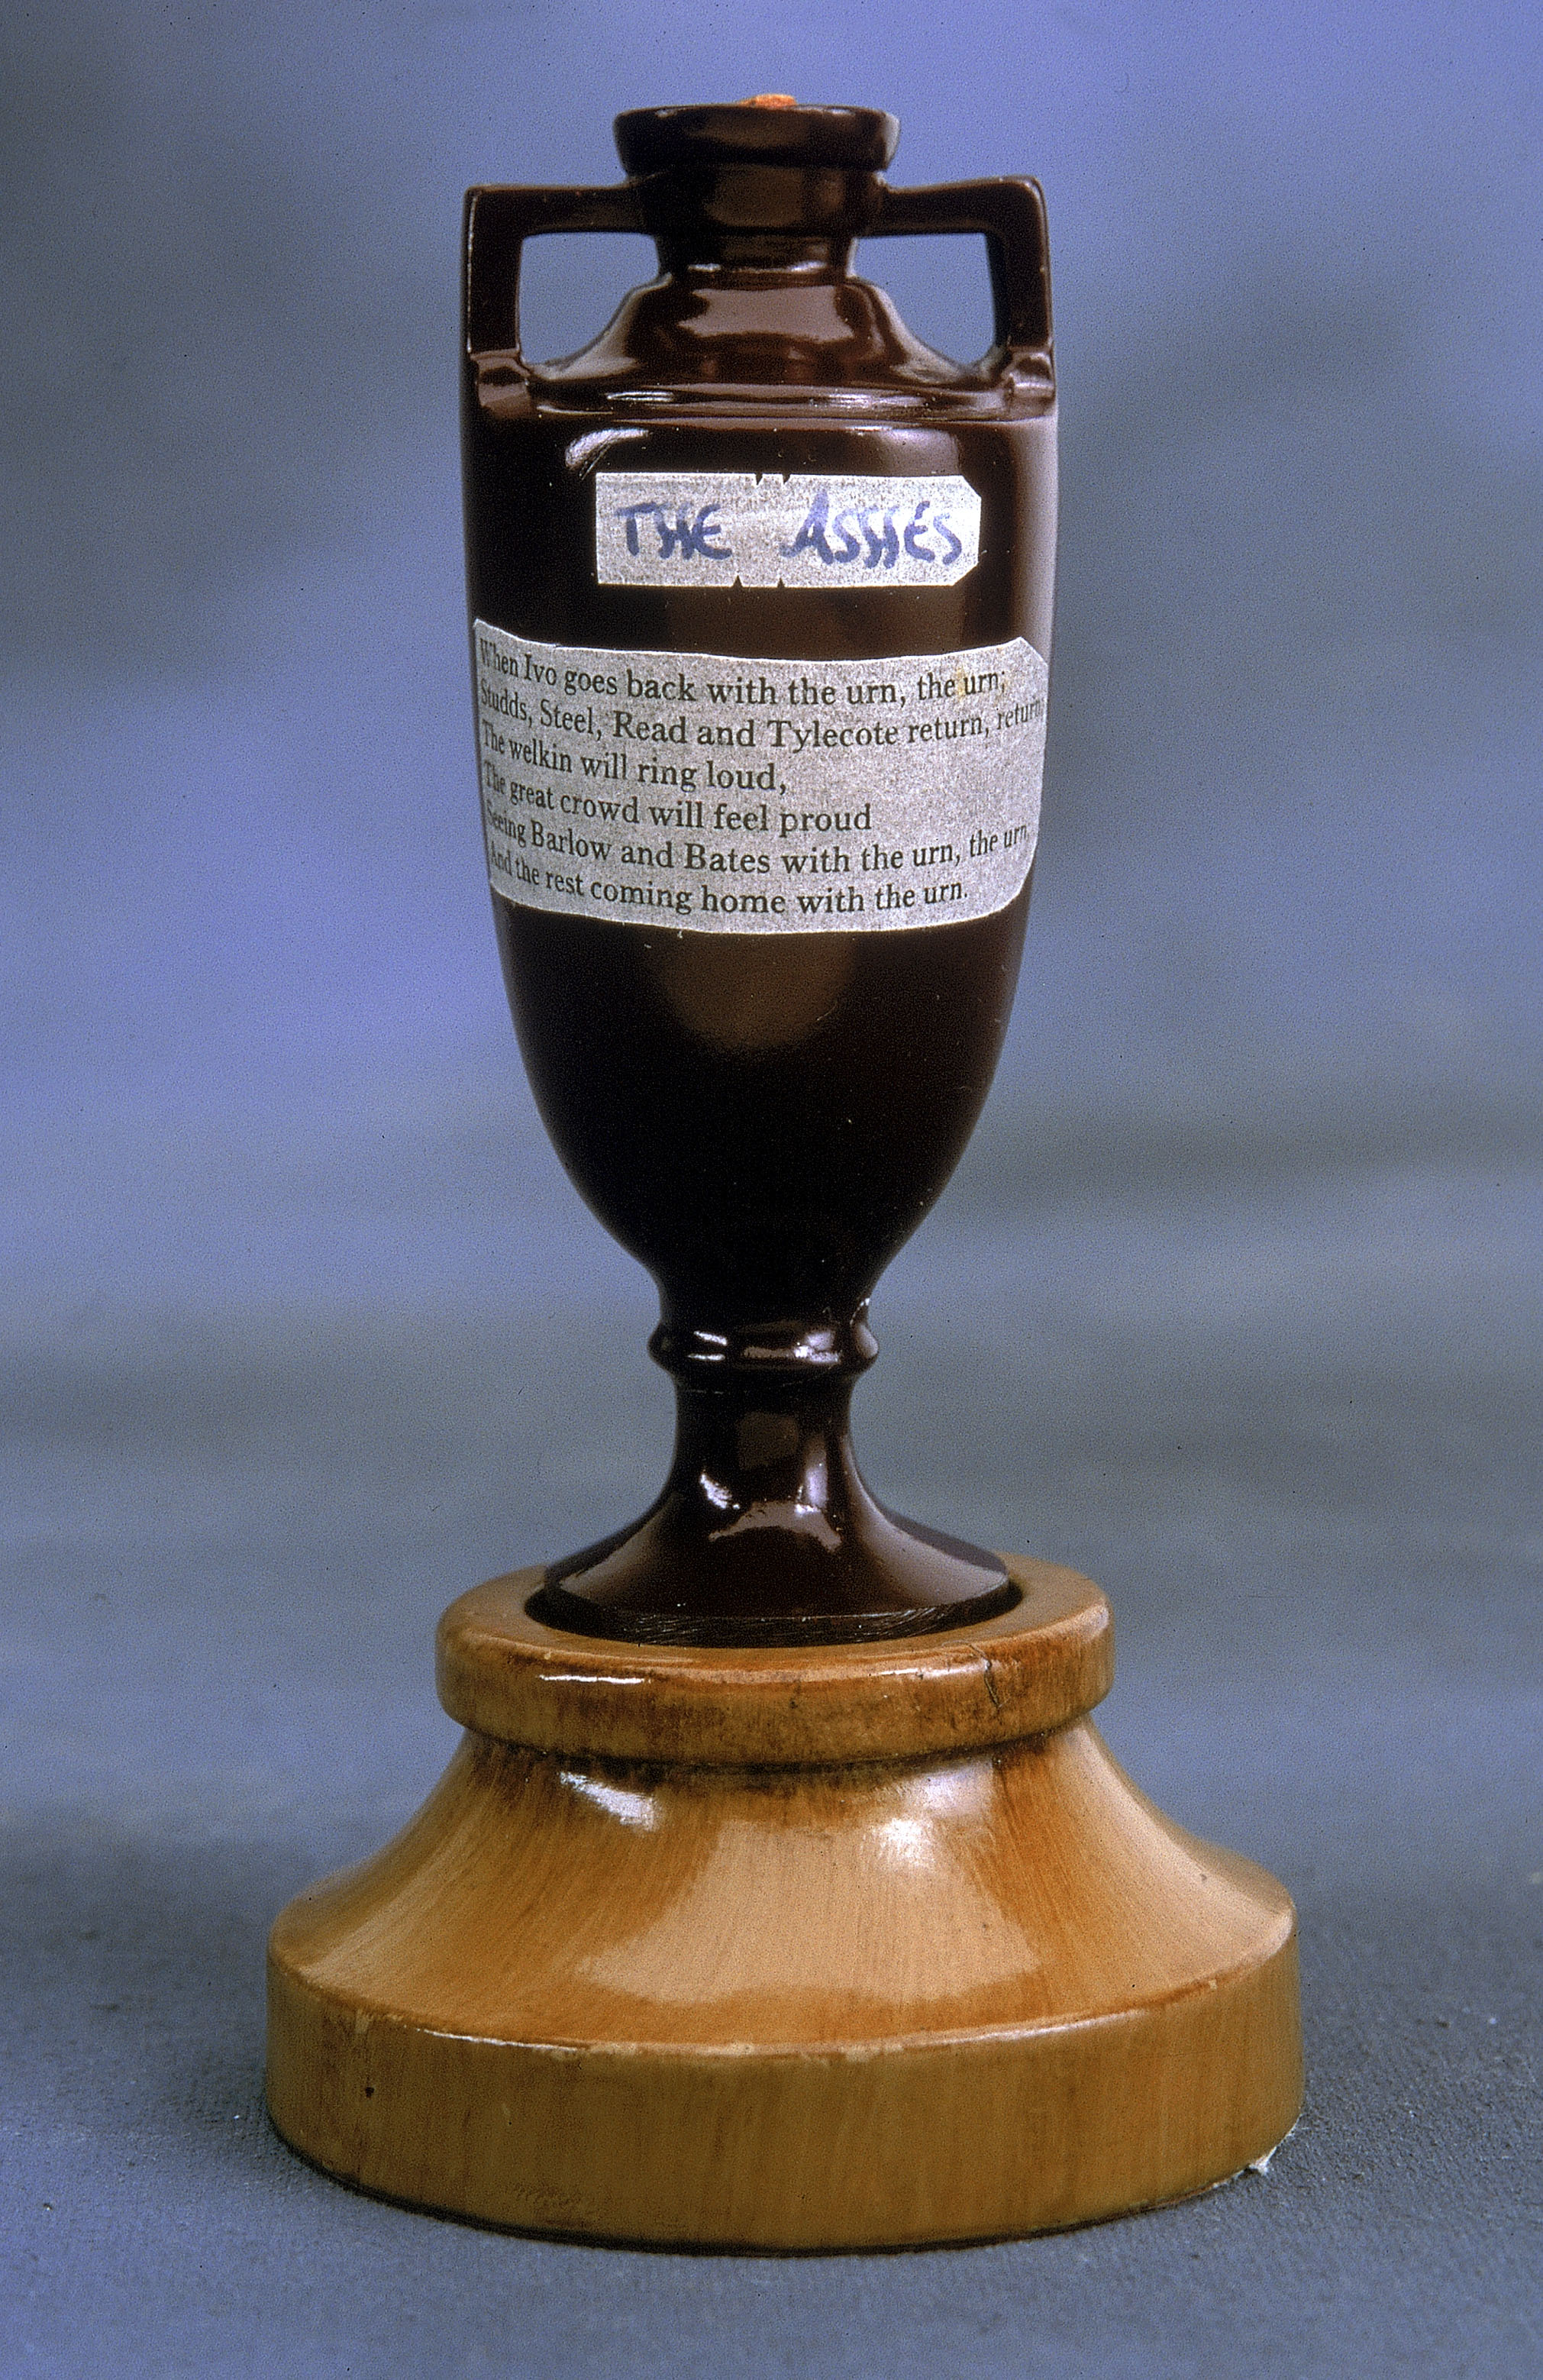 LORDS, ENGLAND 1995: A replica of 'The Ashes' urn on display at Lords in London, England. (Photo by Getty Images)